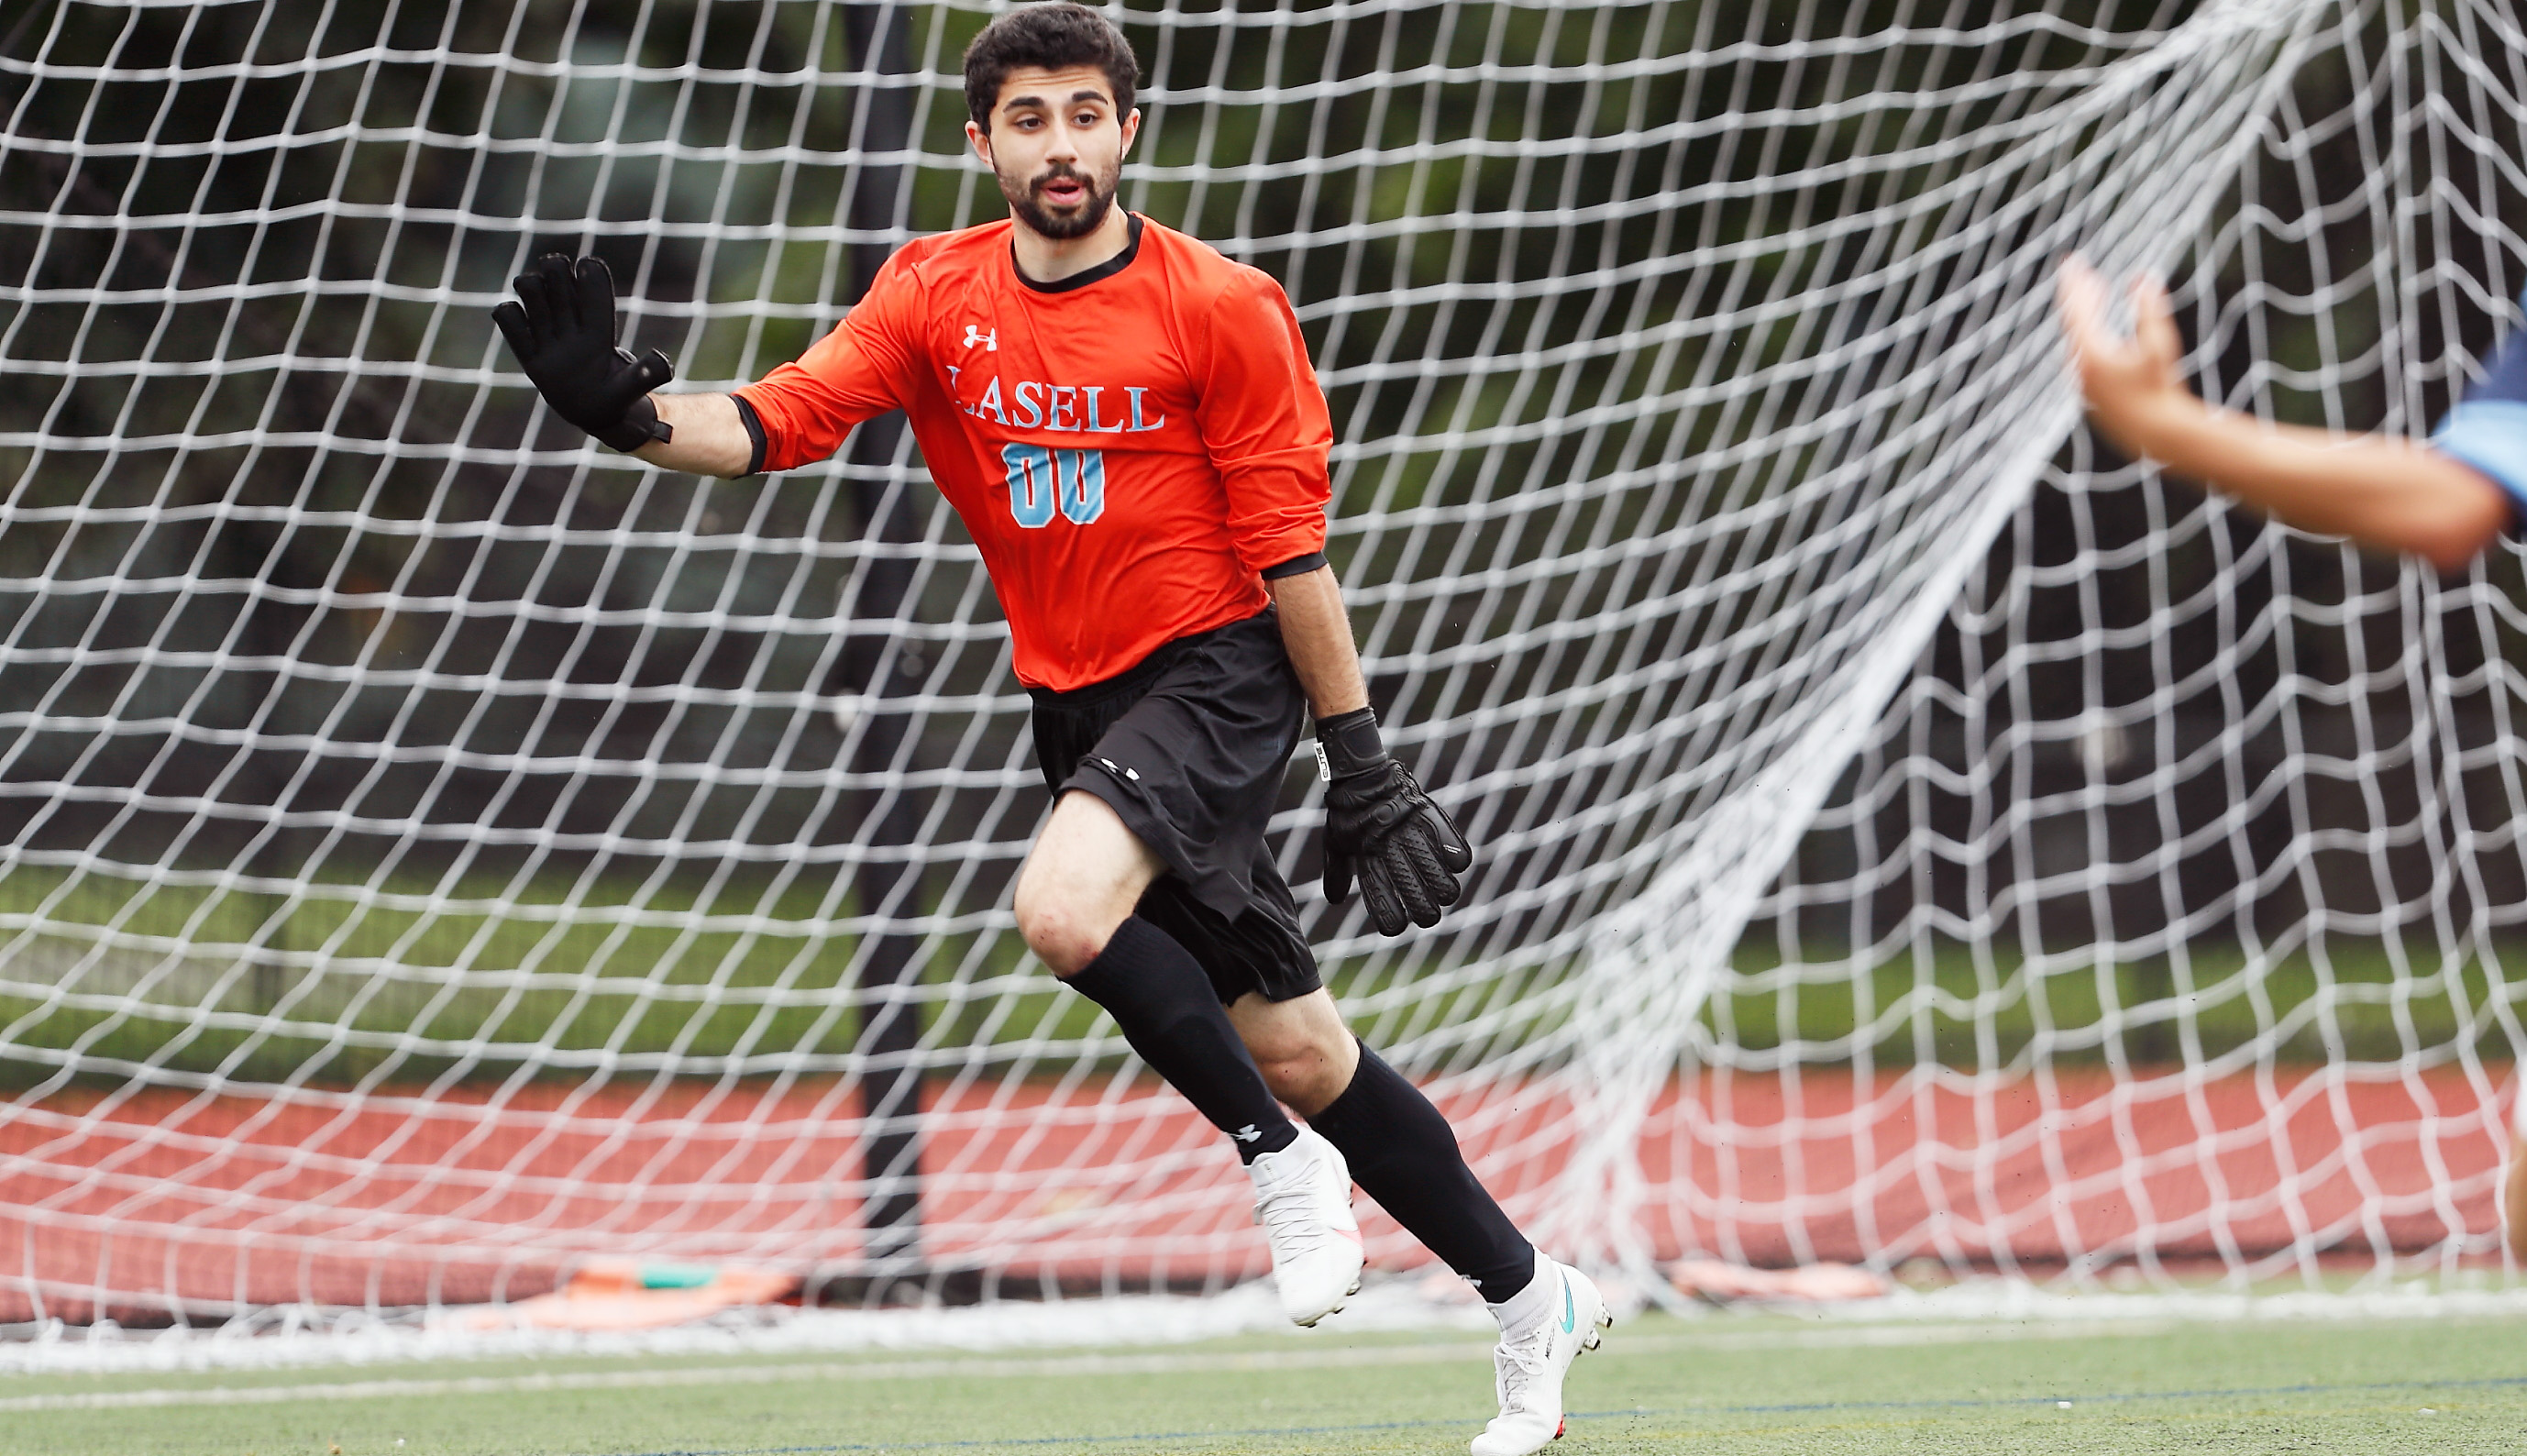 MSOC: Palumbo scores two to lead Lasers to first GNAC victory